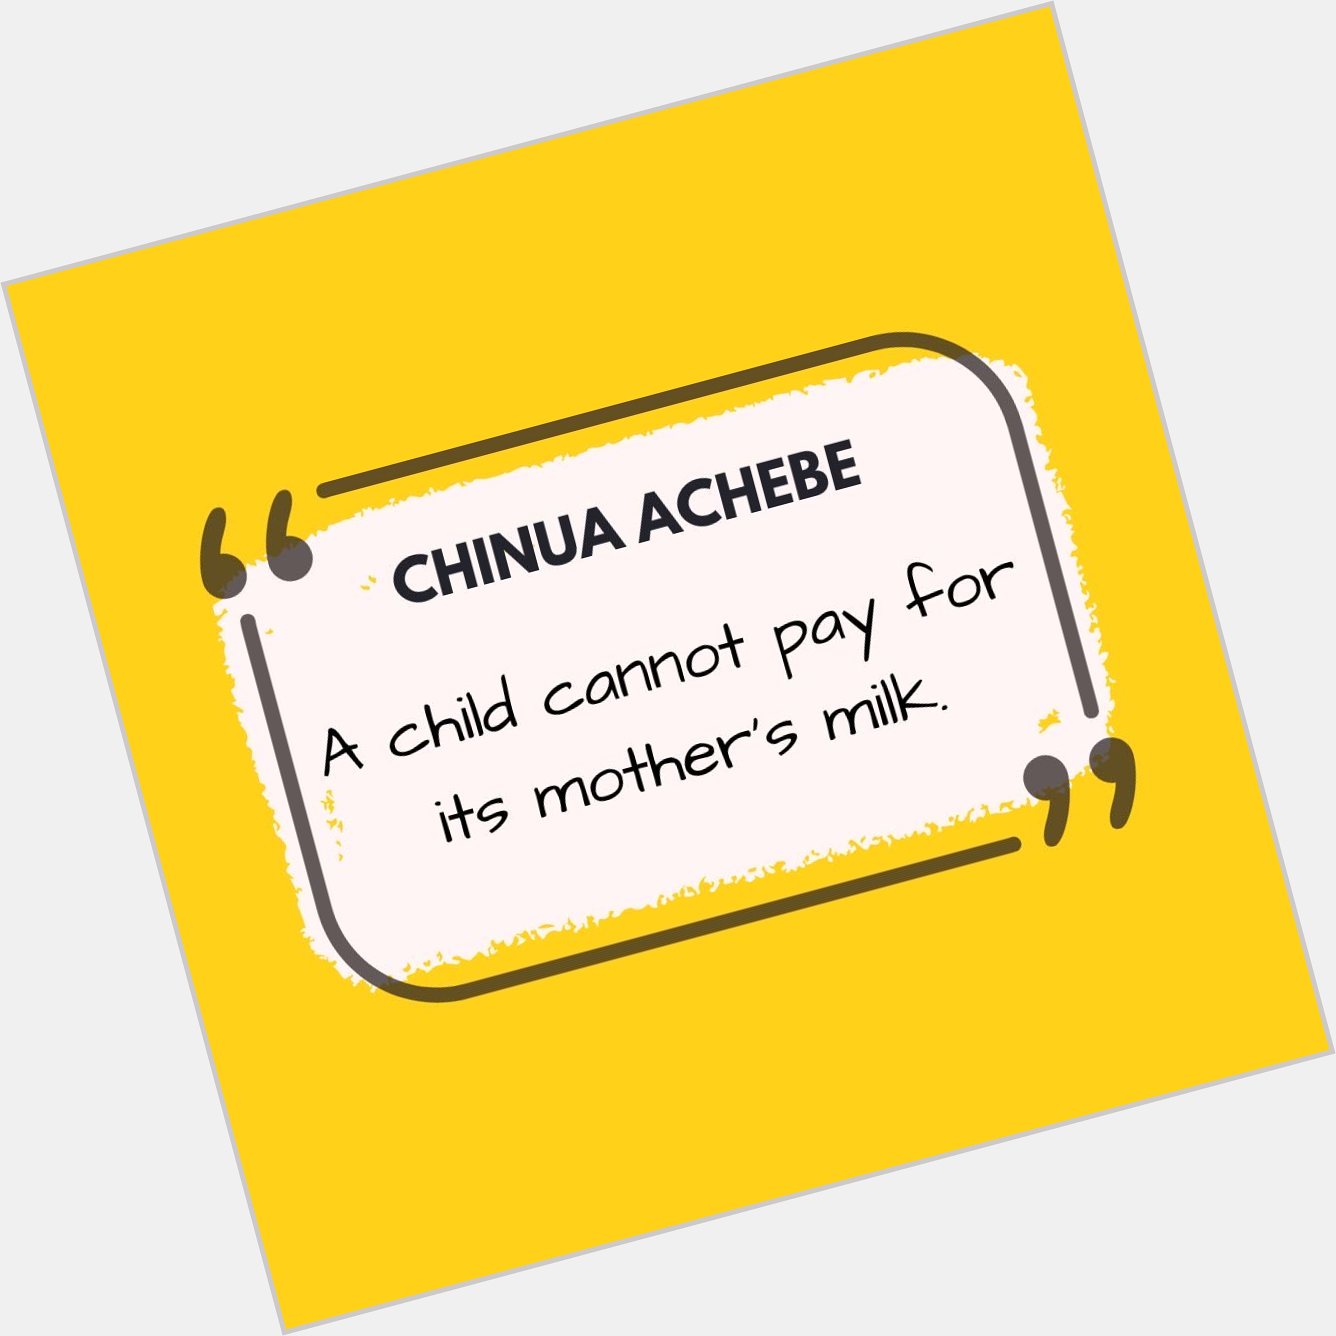 Happy birthday, Chinua Achebe. Thank you for this reminder to not ask our children to live our dreams. 